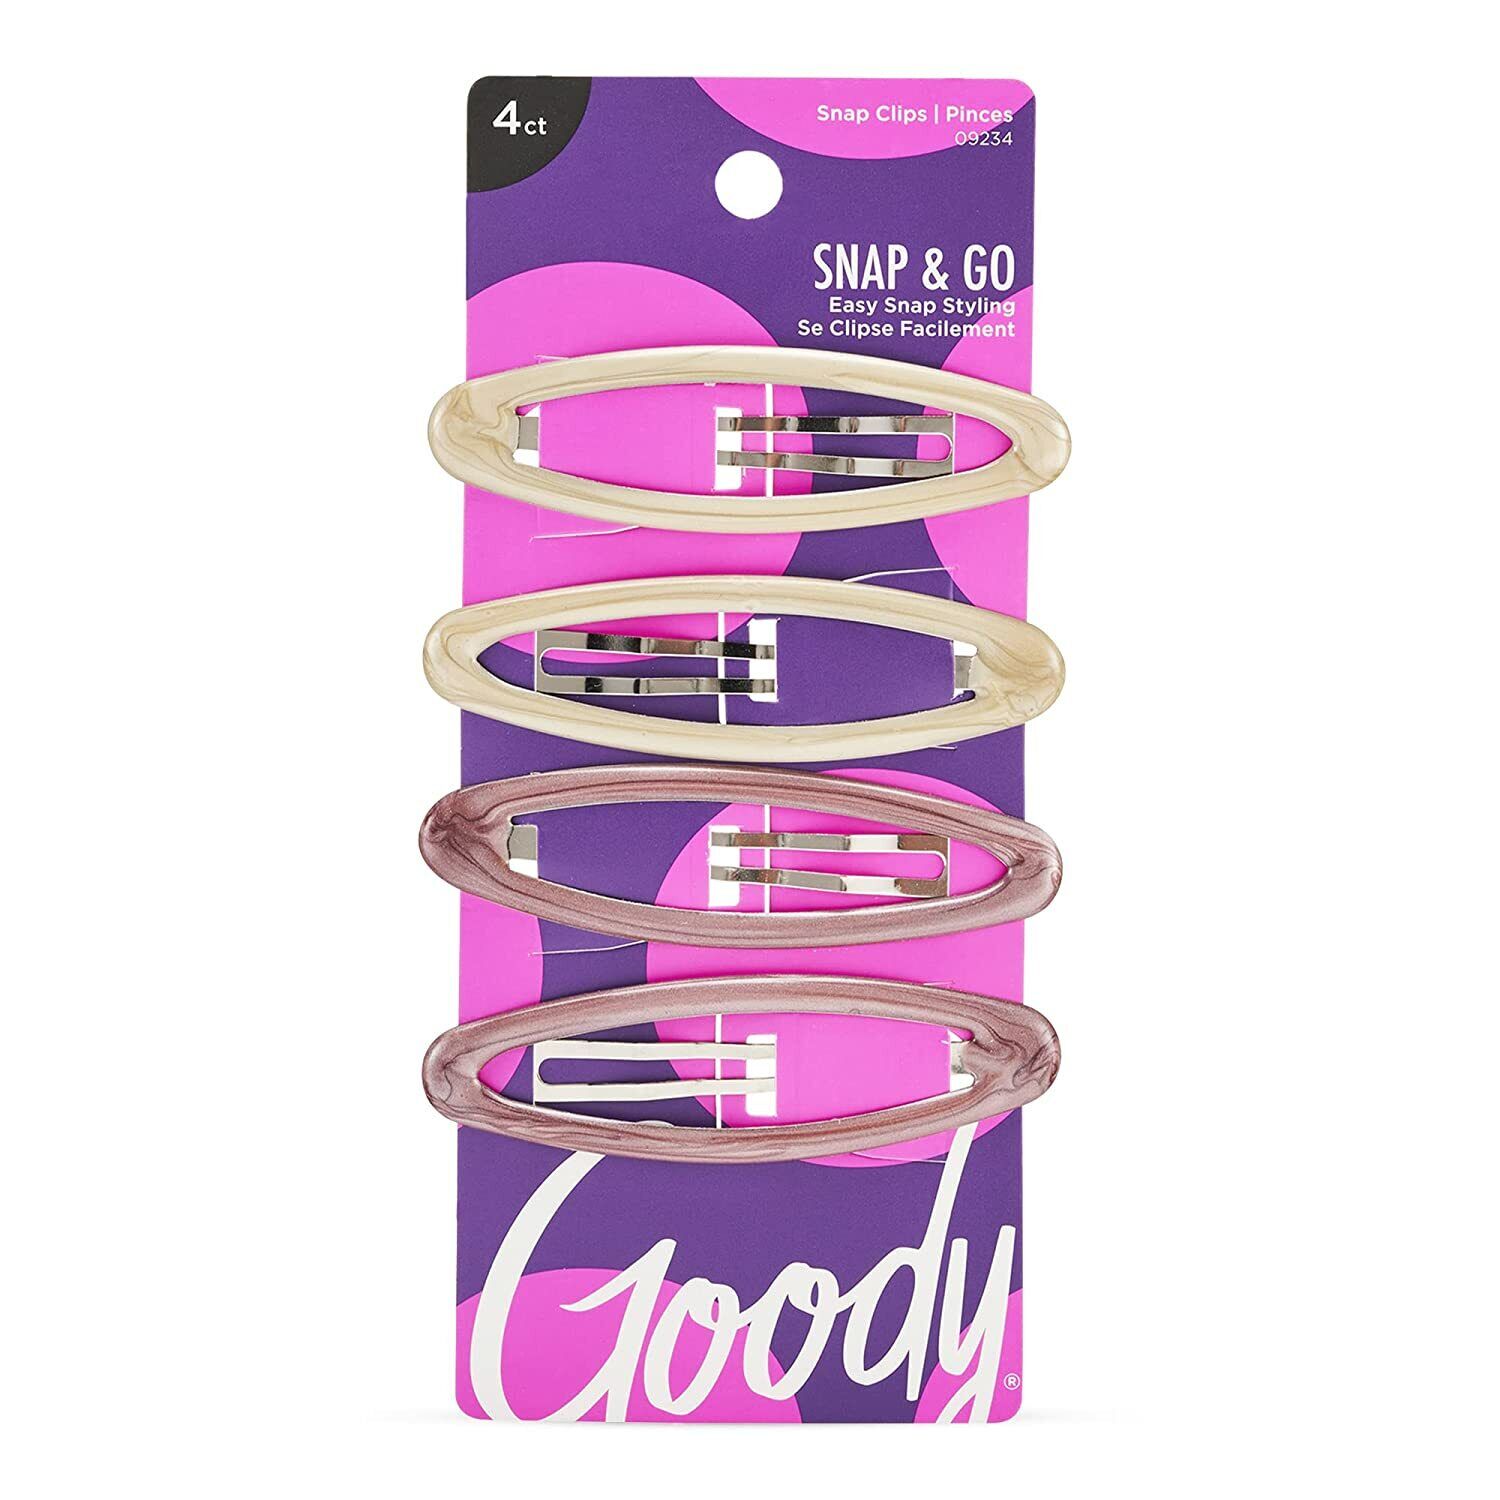 Goody Contour Clip Big Oval UPC:041457092347 Pack:72/1 NO INNER - Click Image to Close